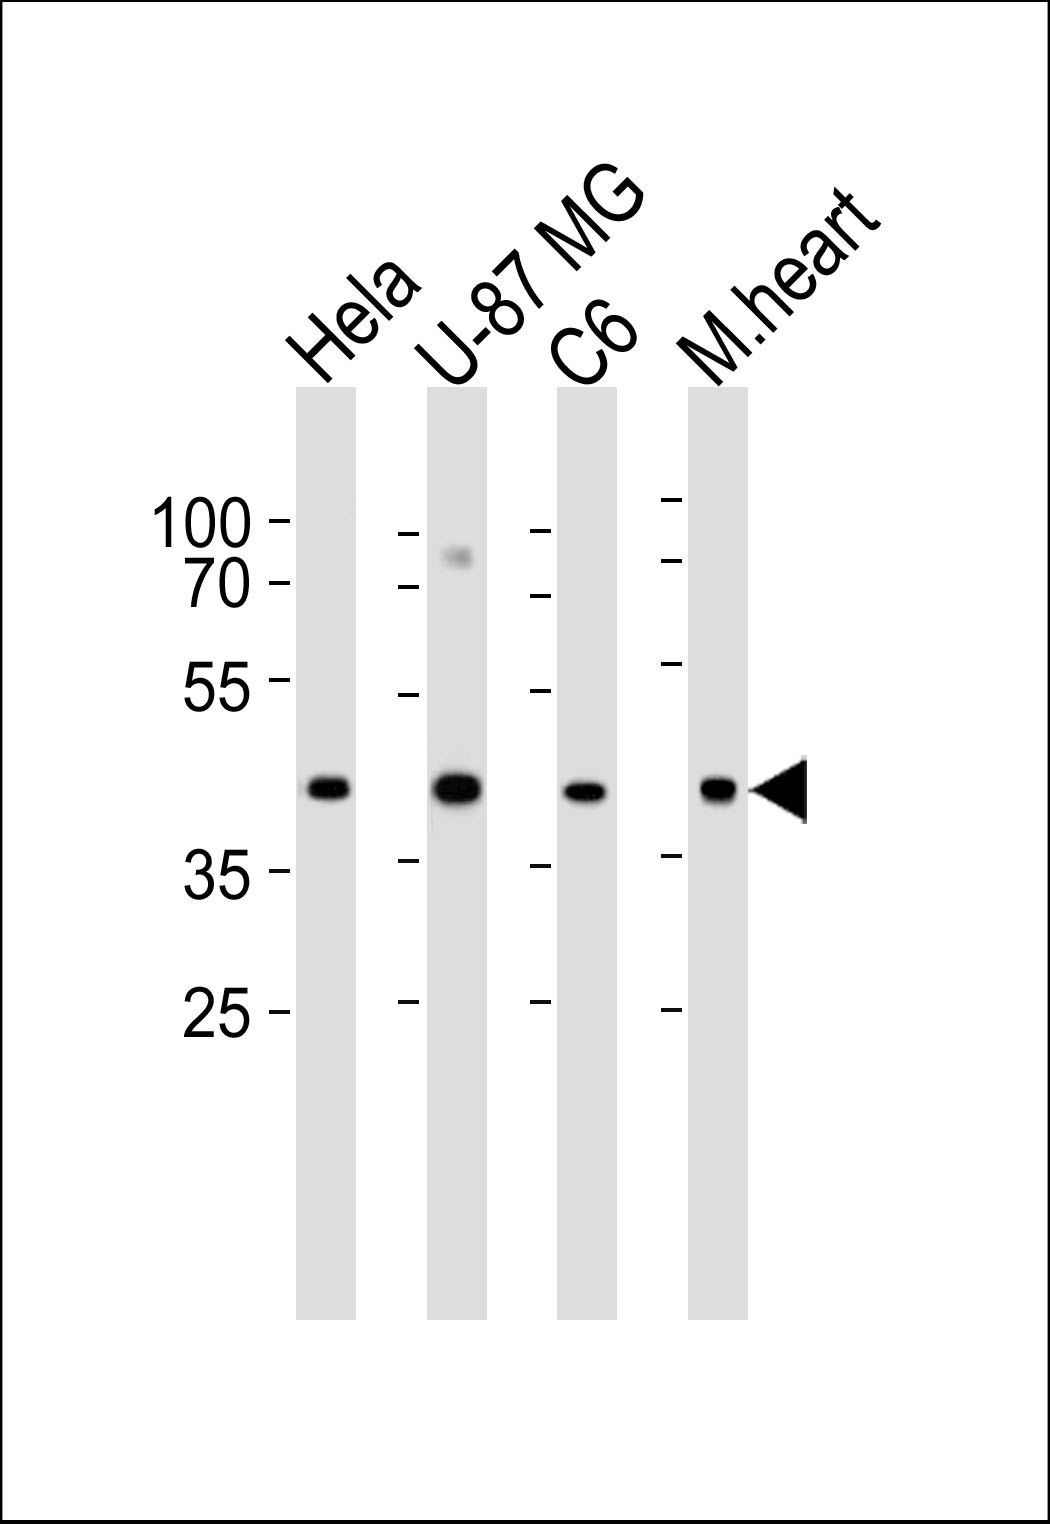 Western blot analysis of lysates from Hela, U-87 MG, C6 cell line and mouse heart tissue lysate (from left to right), using GJA1 Antibody (N121)(Cat.  #AP1541b). AP1541b was diluted at 1:1000 at each lane.  A goat anti-rabbit IgG H&L(HRP) at 1:5000 dilution was used as the secondary antibody. Lysates at 35ug per lane.